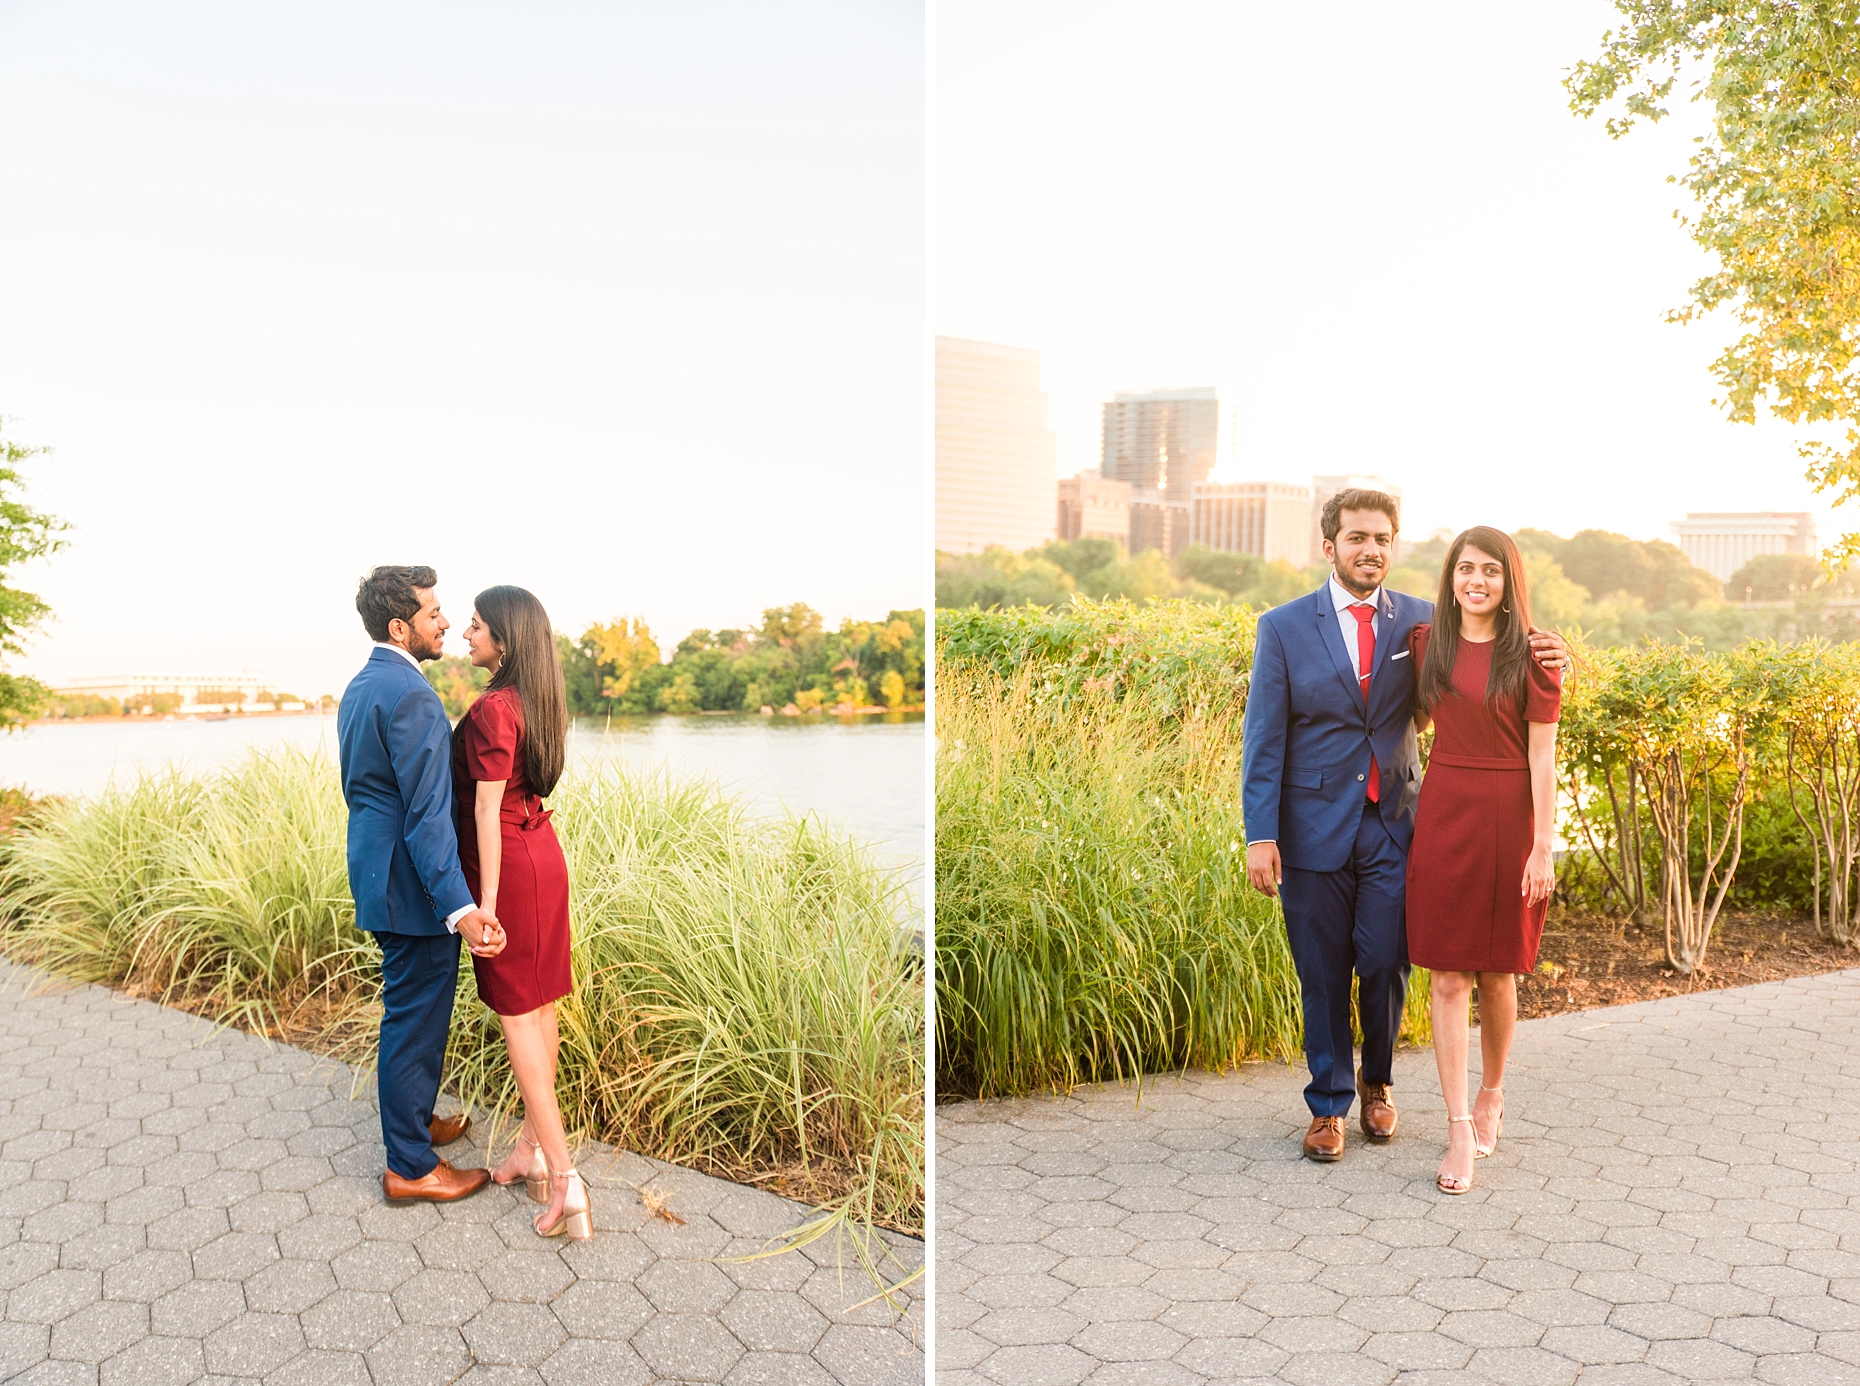 GeorgetownWaterfrontDCProposalPhotographer-ManaliPhotography-046